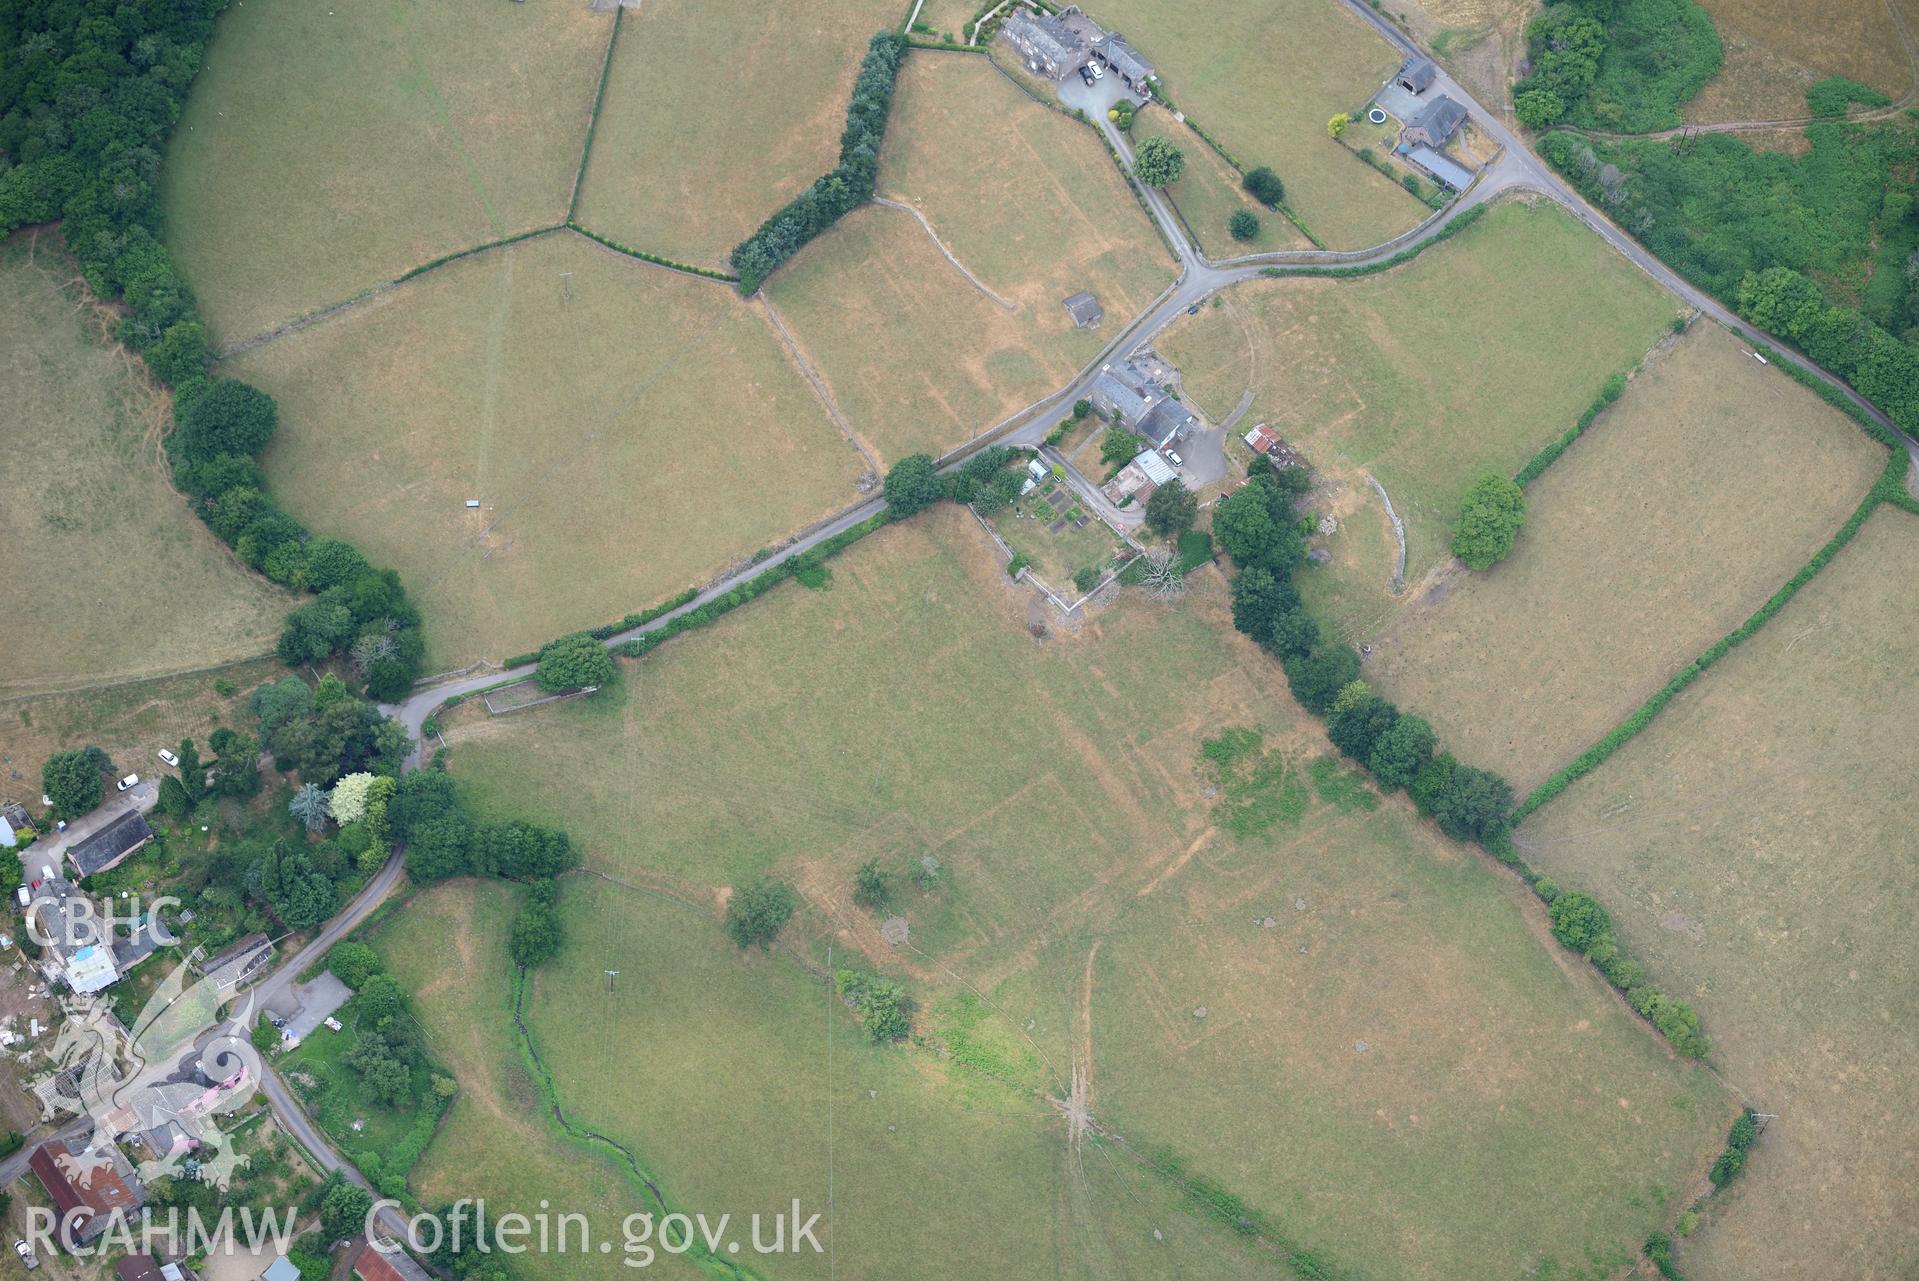 Royal Commission aerial photography of extensive parchmarks at Pen y Gaer Roman fort, including the internal plan and extramural buildings, taken on 19th July 2018 during the 2018 drought.